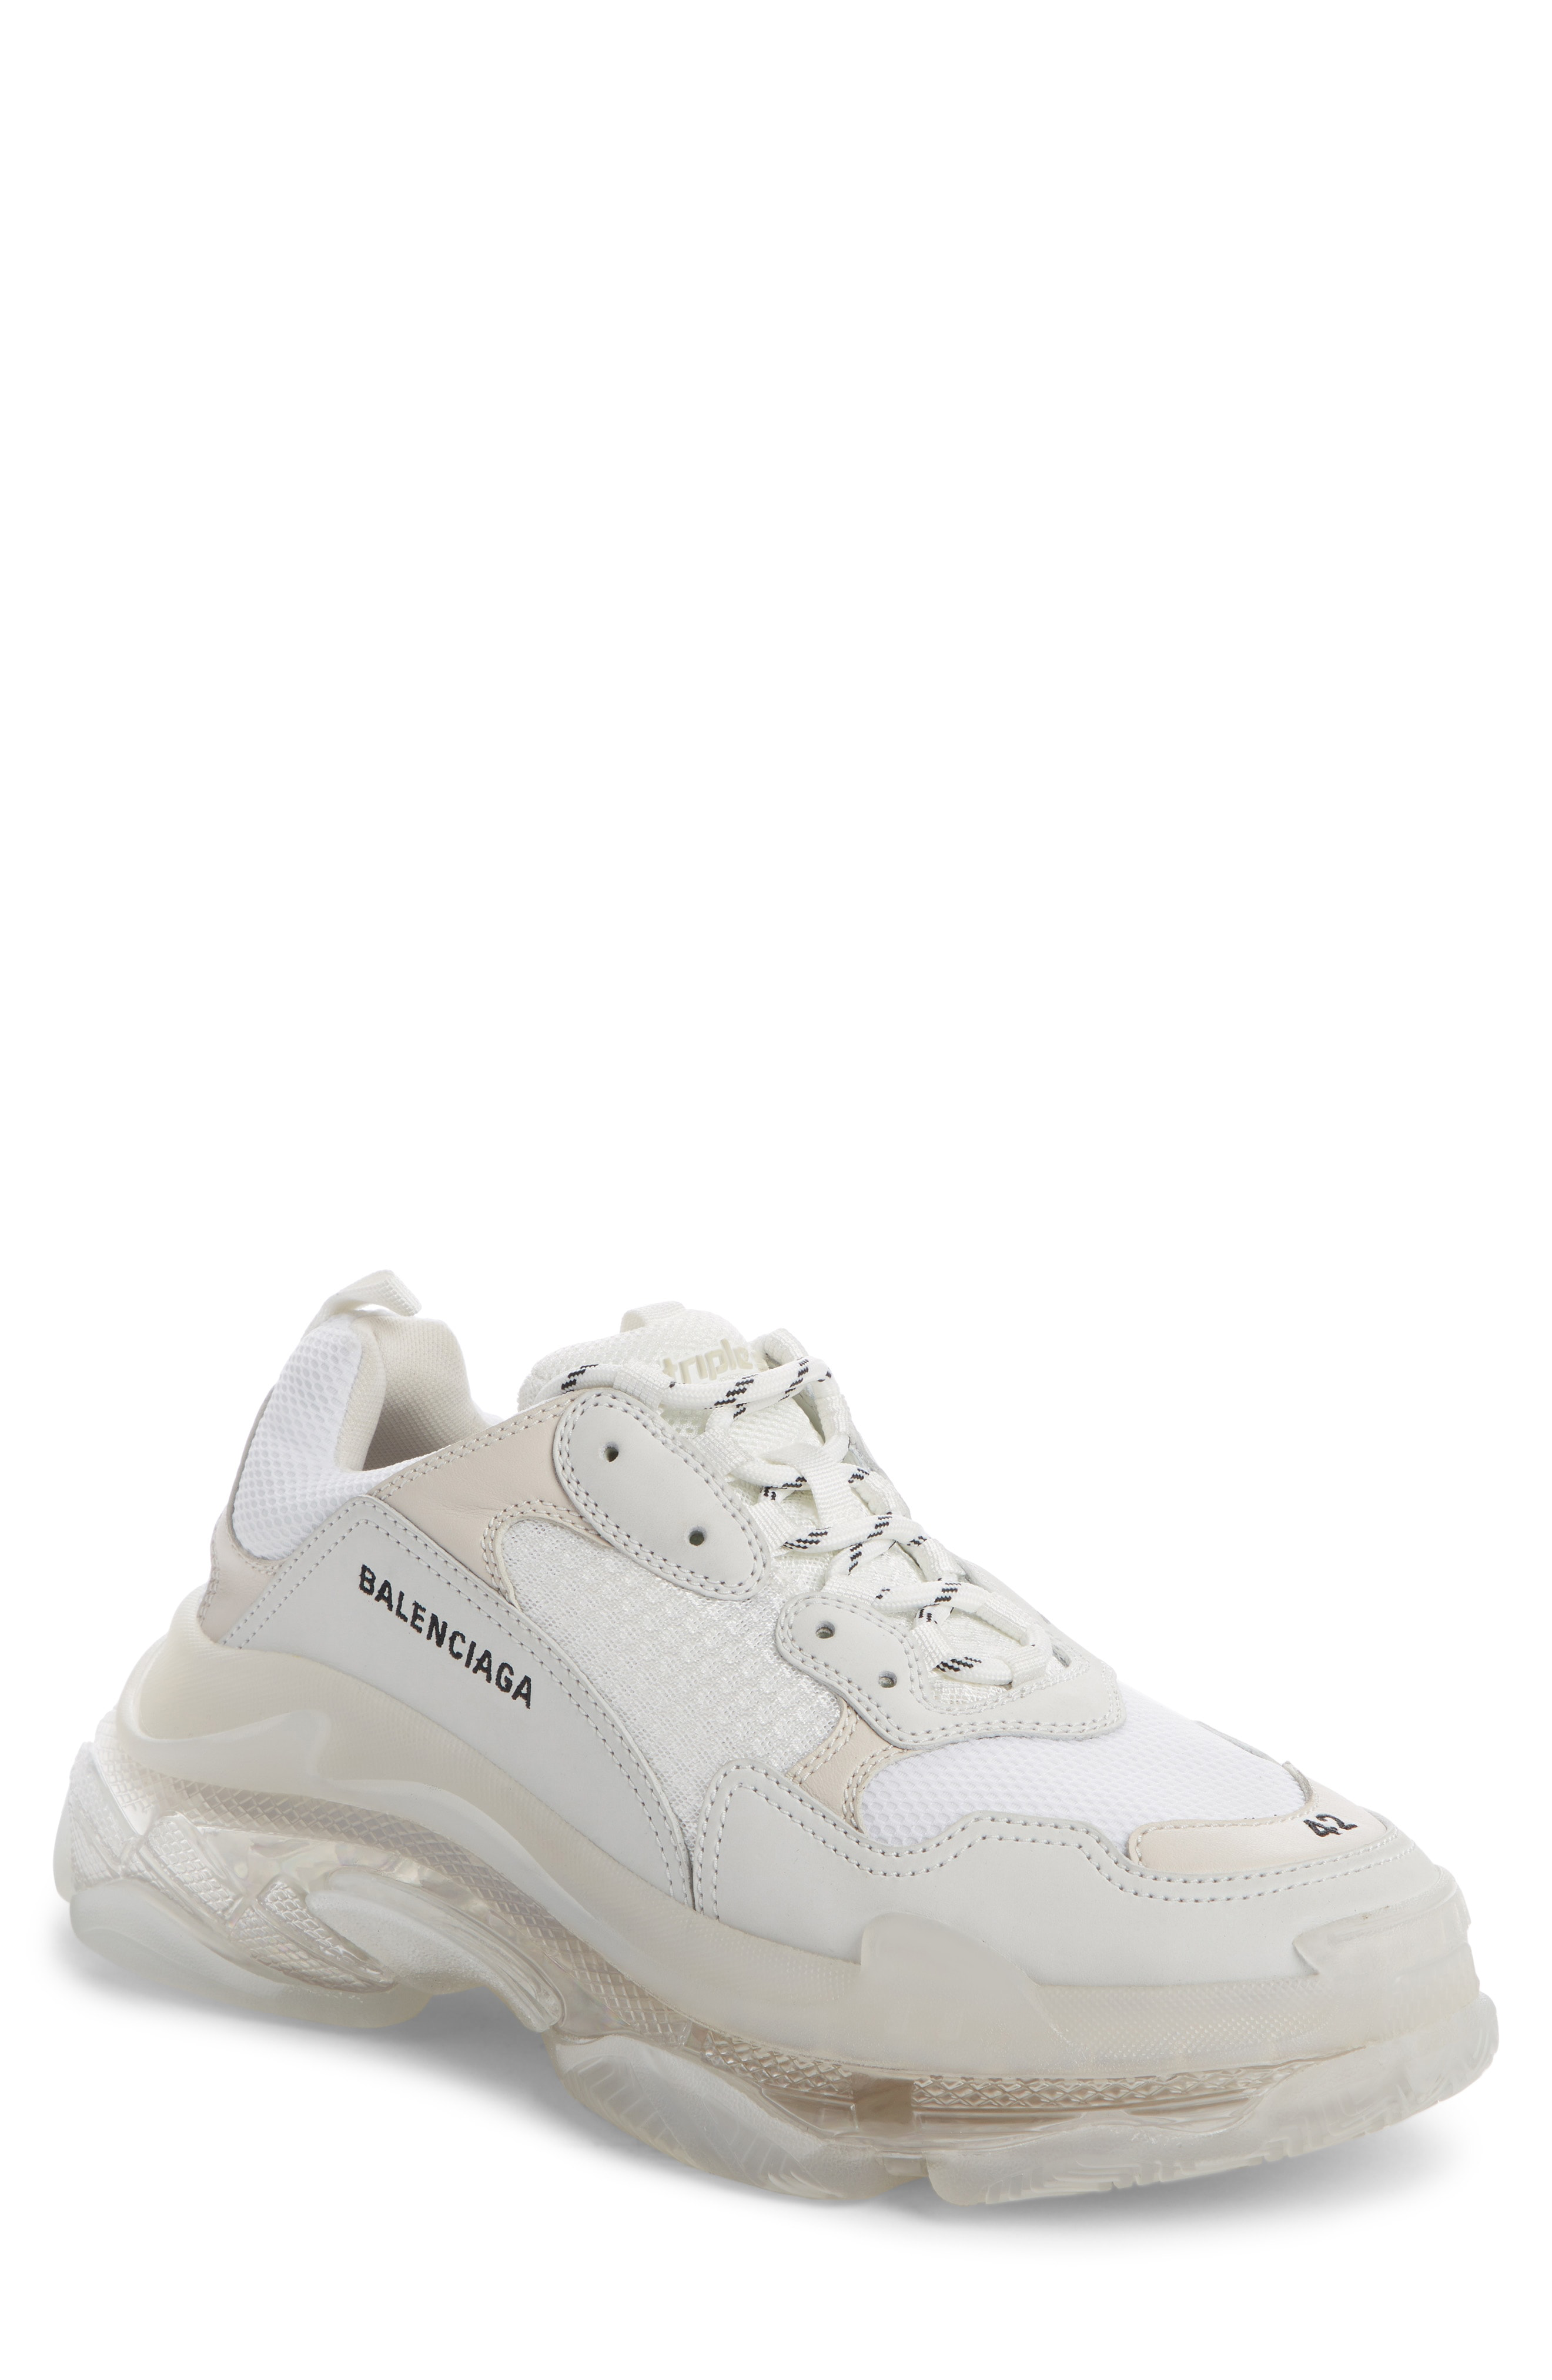 Balenciaga Triple S Sneakers Grey Red Running Shoes for